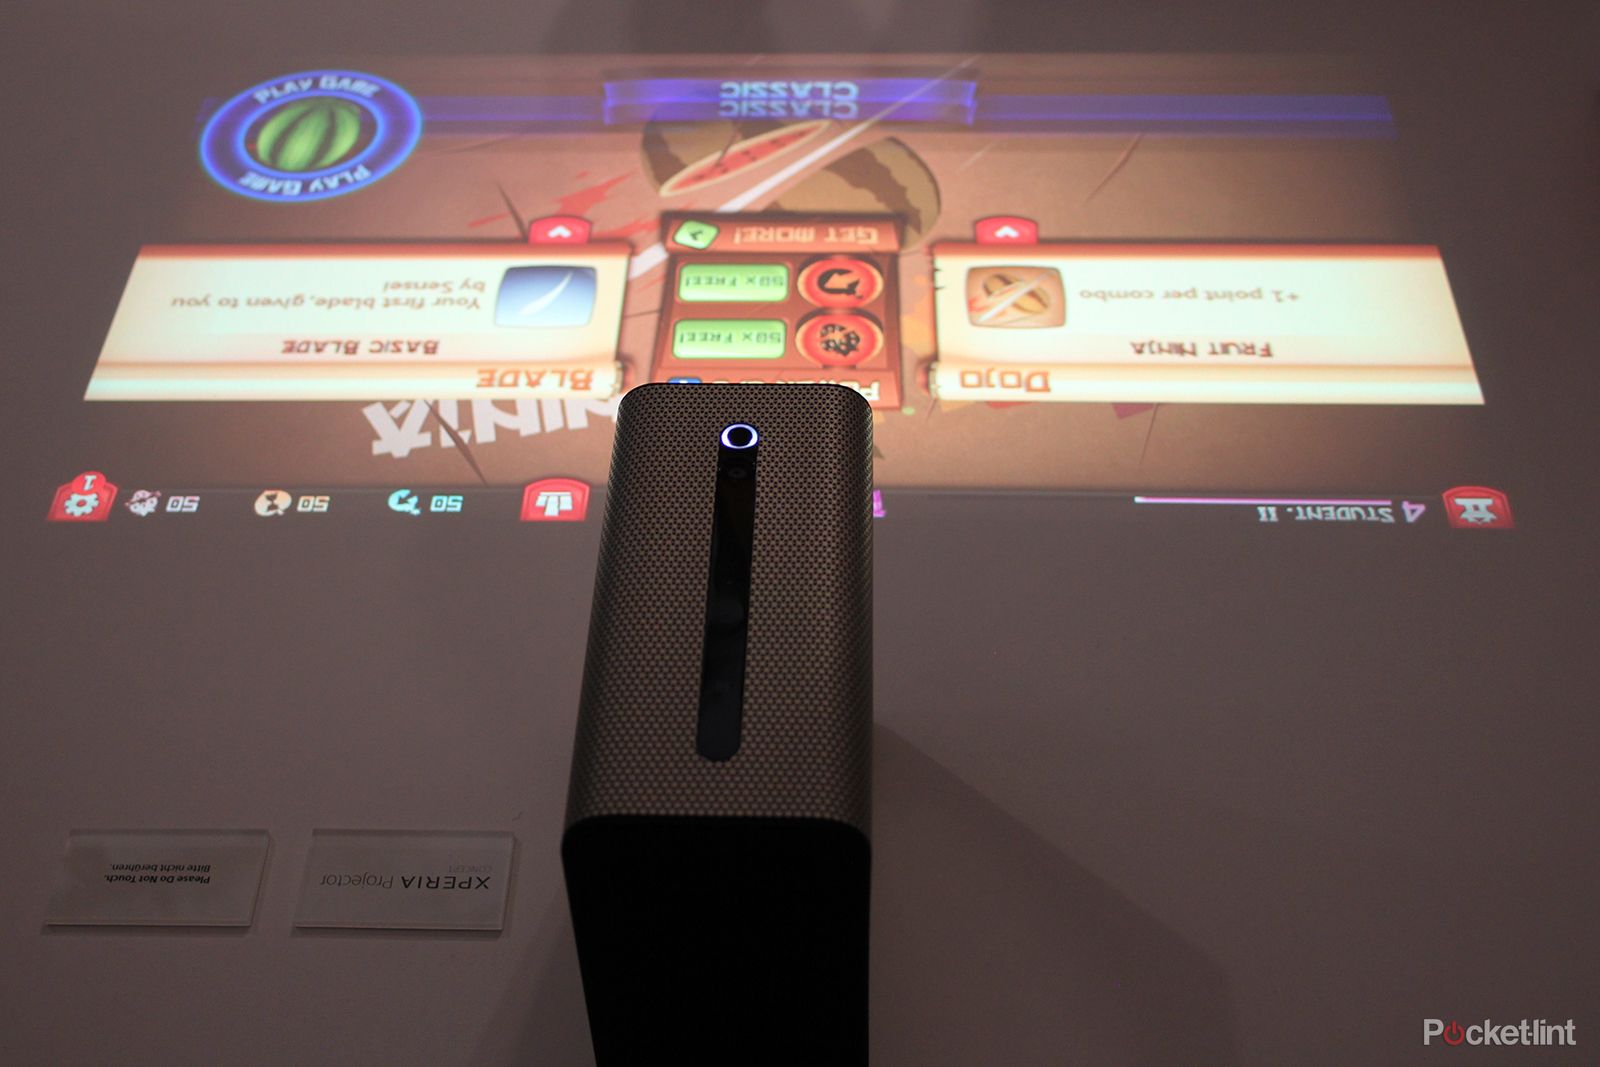 sony xperia projector concept will let you play candy crush on the kitchen table image 3